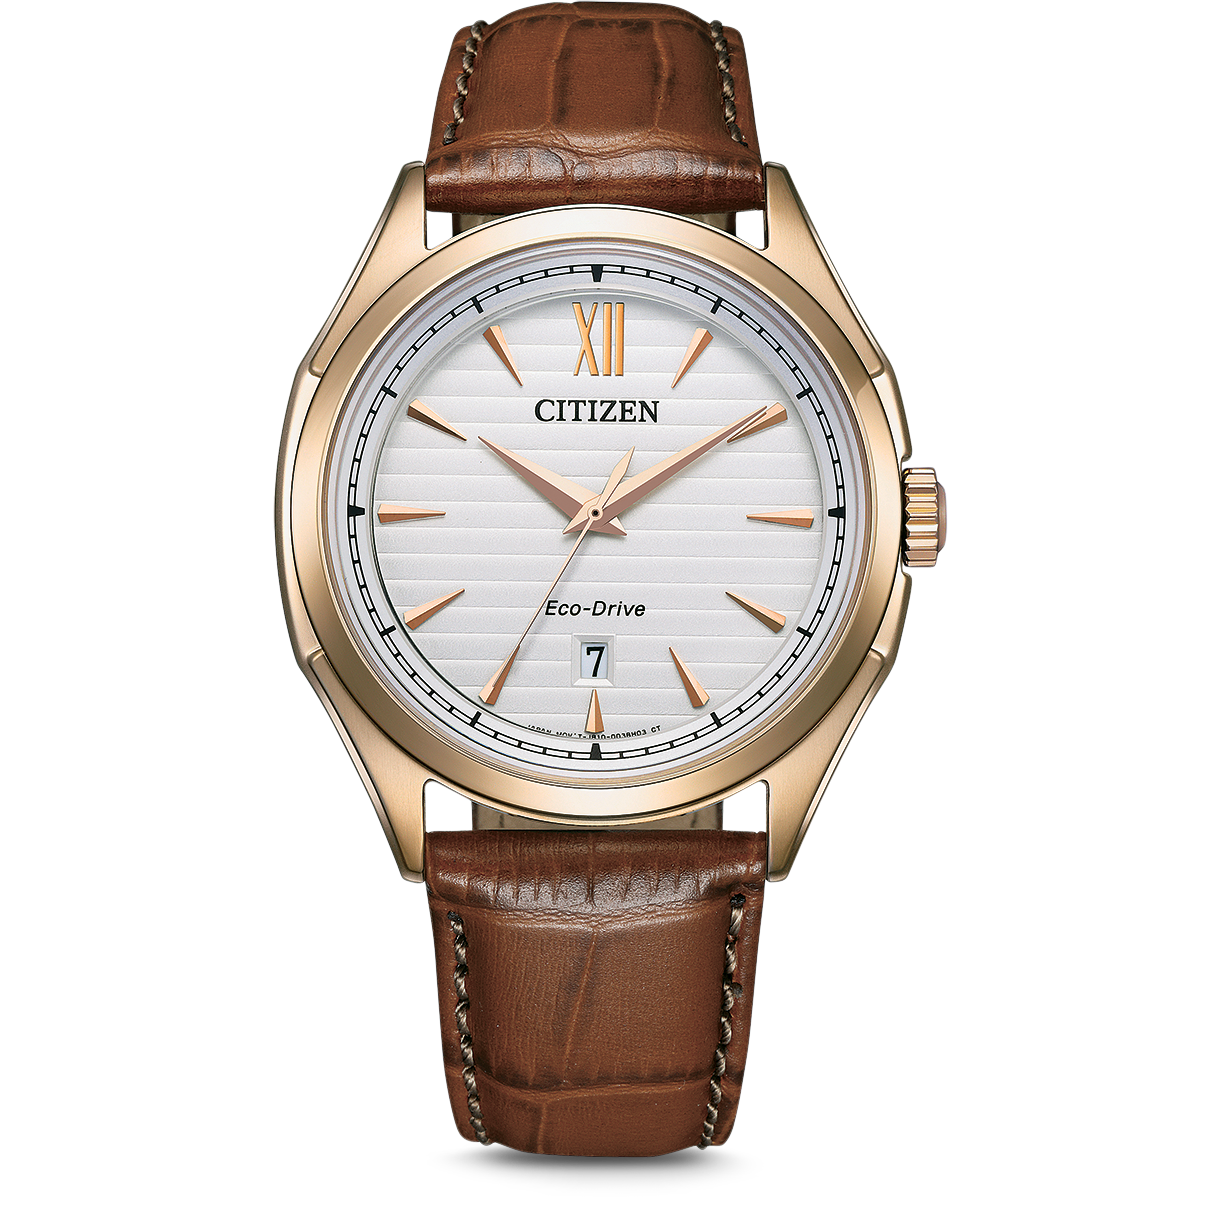 Citizen Eco-Drive Men's Watch Black AW1750-85E – Watches & Crystals